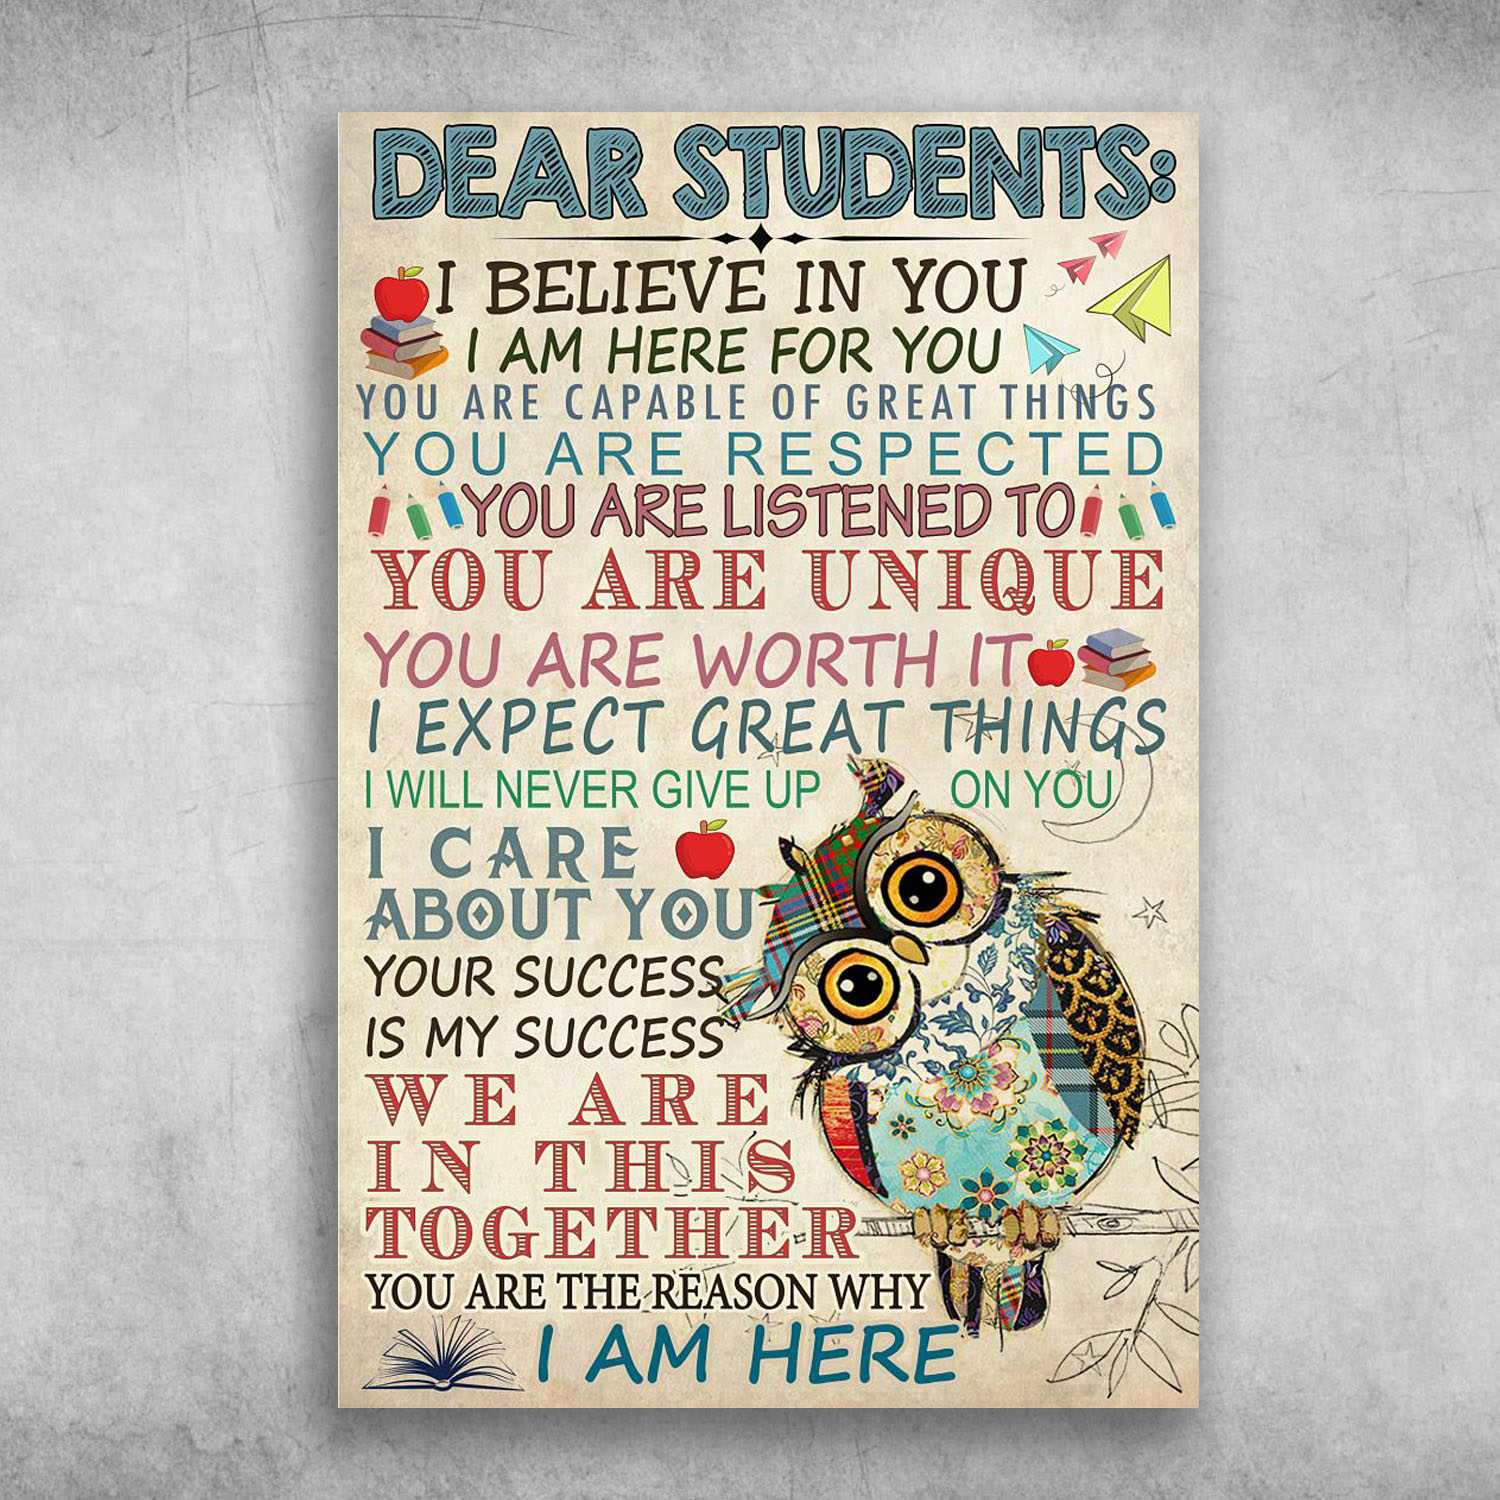 Dear Sudents I Believe In You I am Here For You